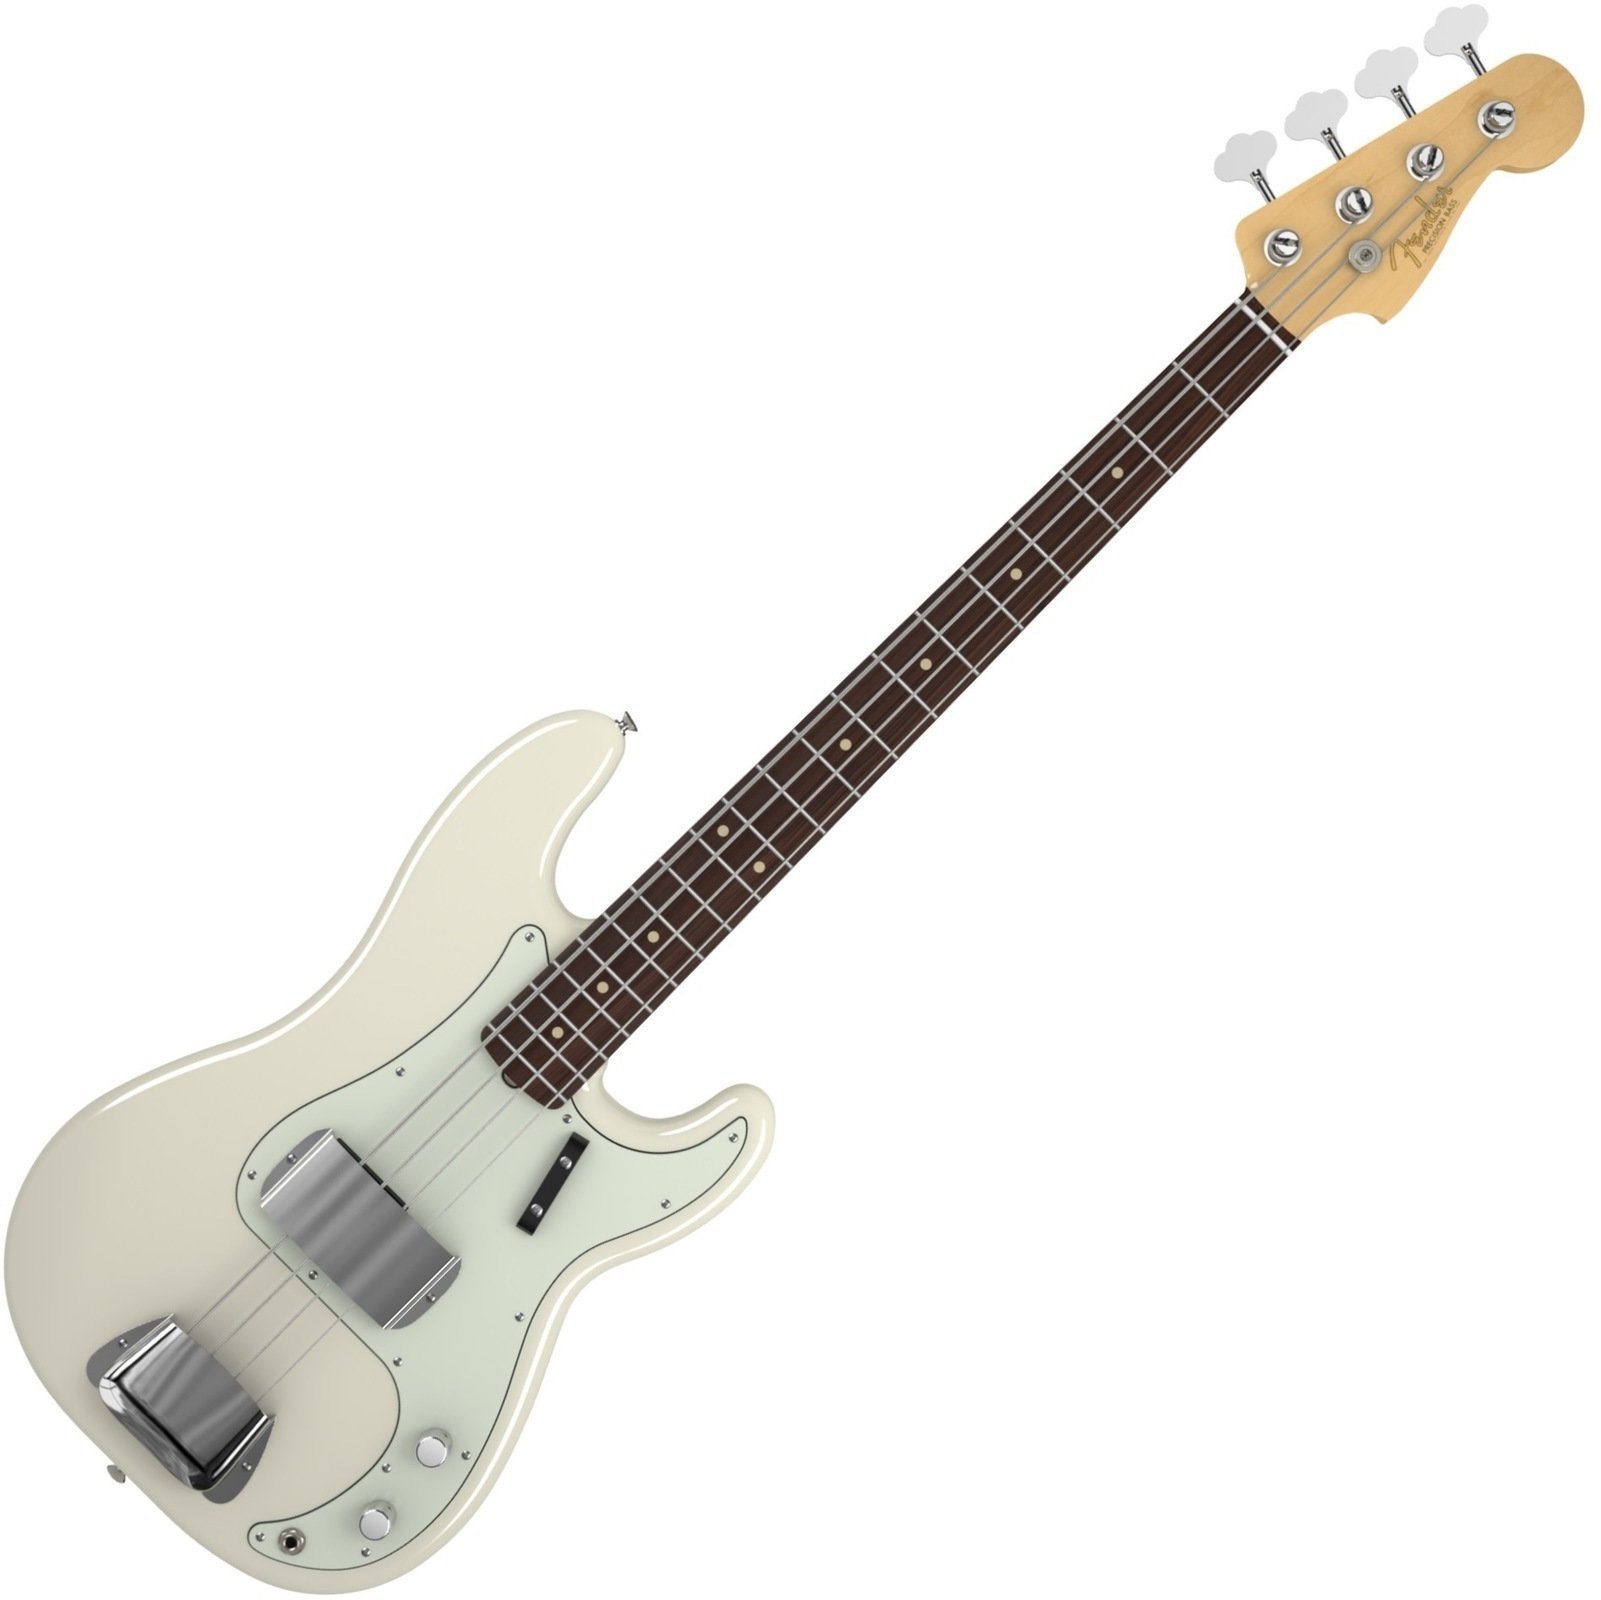 4-string Bassguitar Fender American Vintage '63 Precision Bass, Rosewood Fingerboard, Olympic White